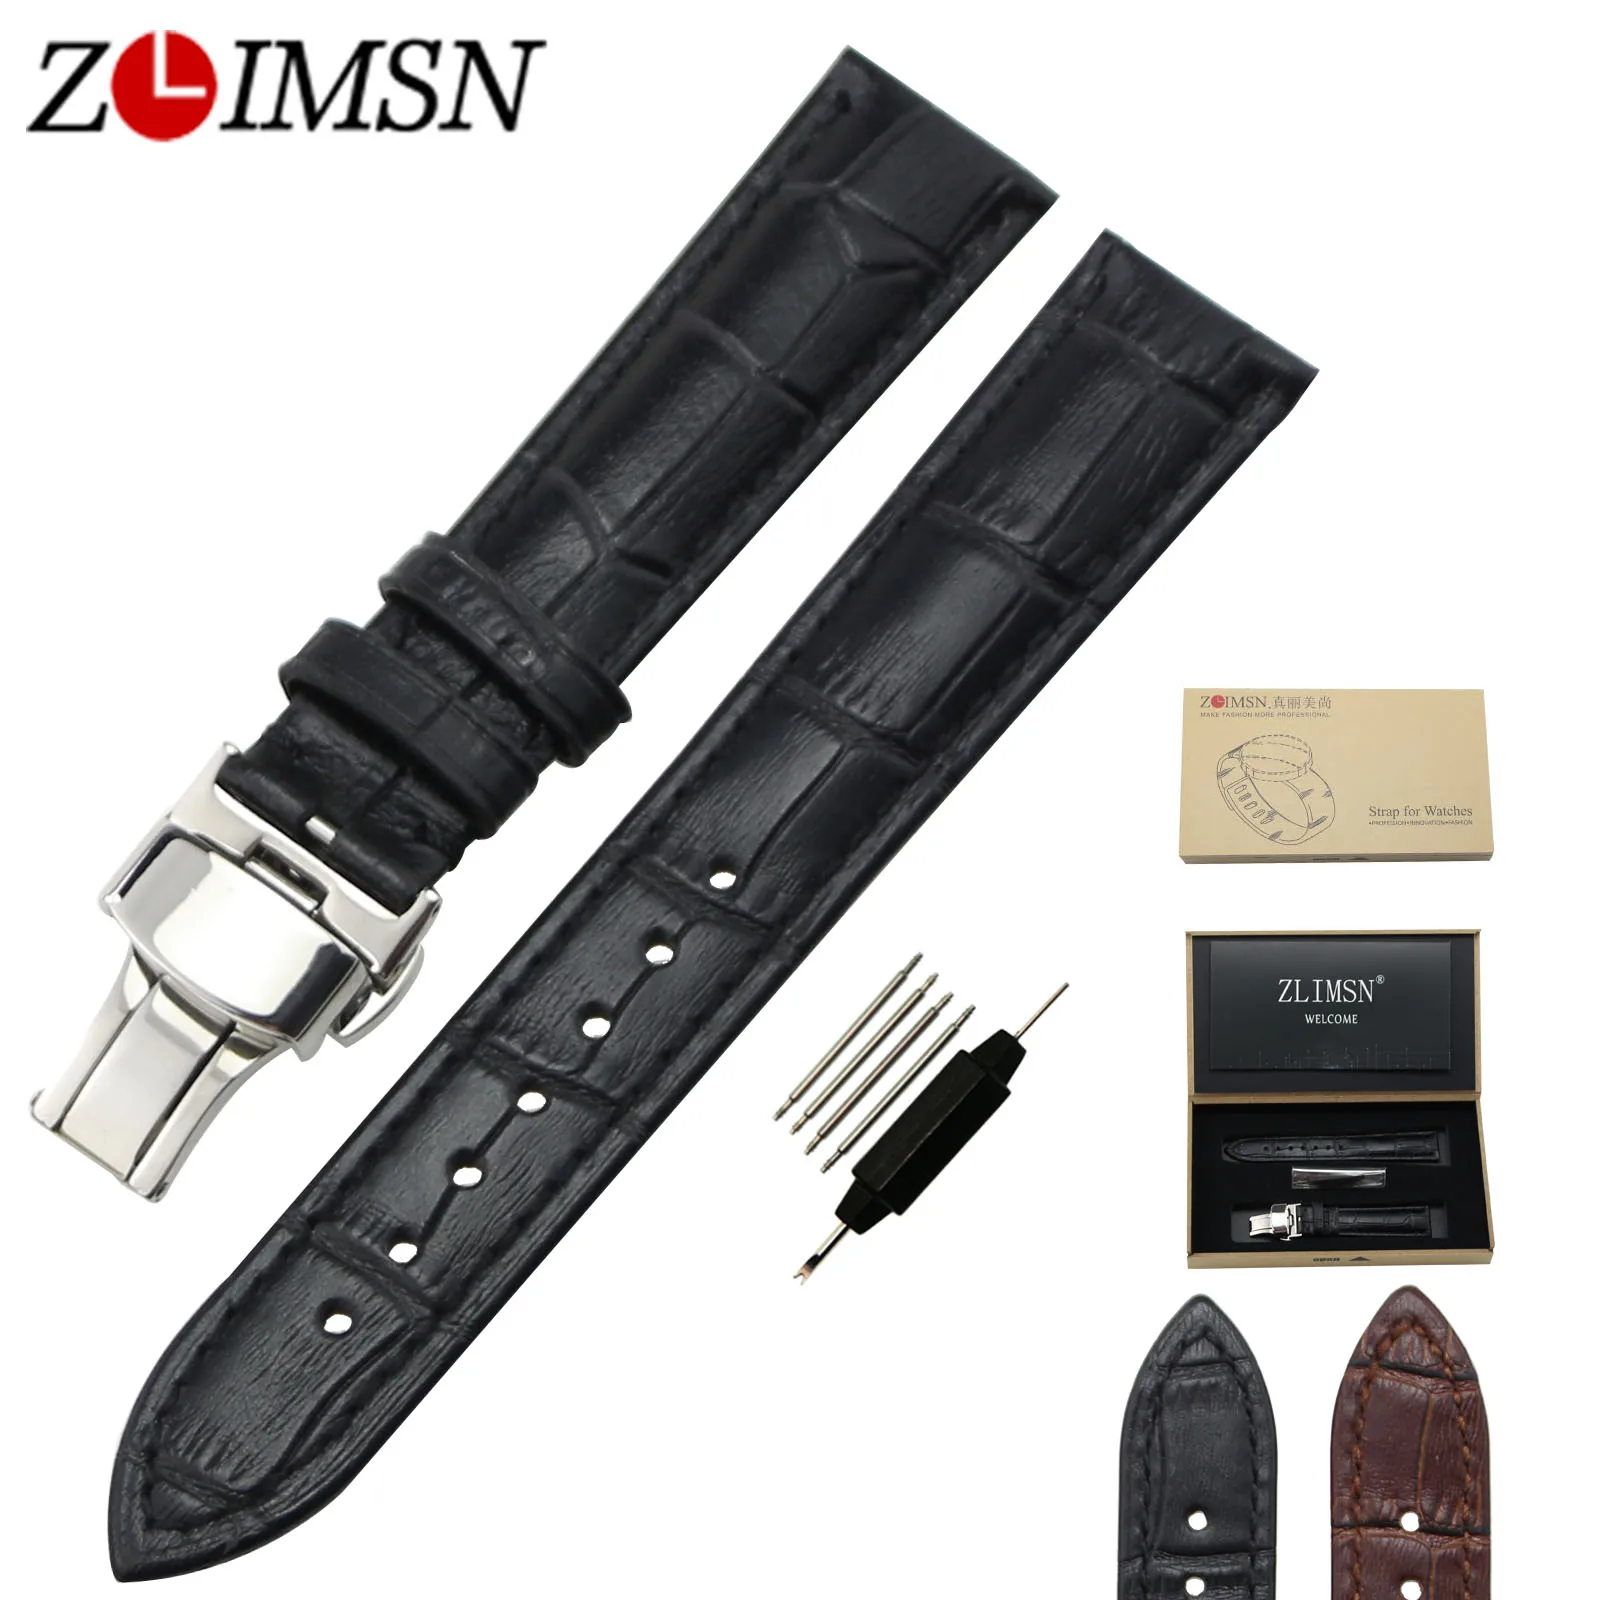 

ZLIMSN Genuine Leather Watchband 18 20mm Watch Strap Stainless Steel Butterfly Buckle Black Brown Wristband Relojes Hombre